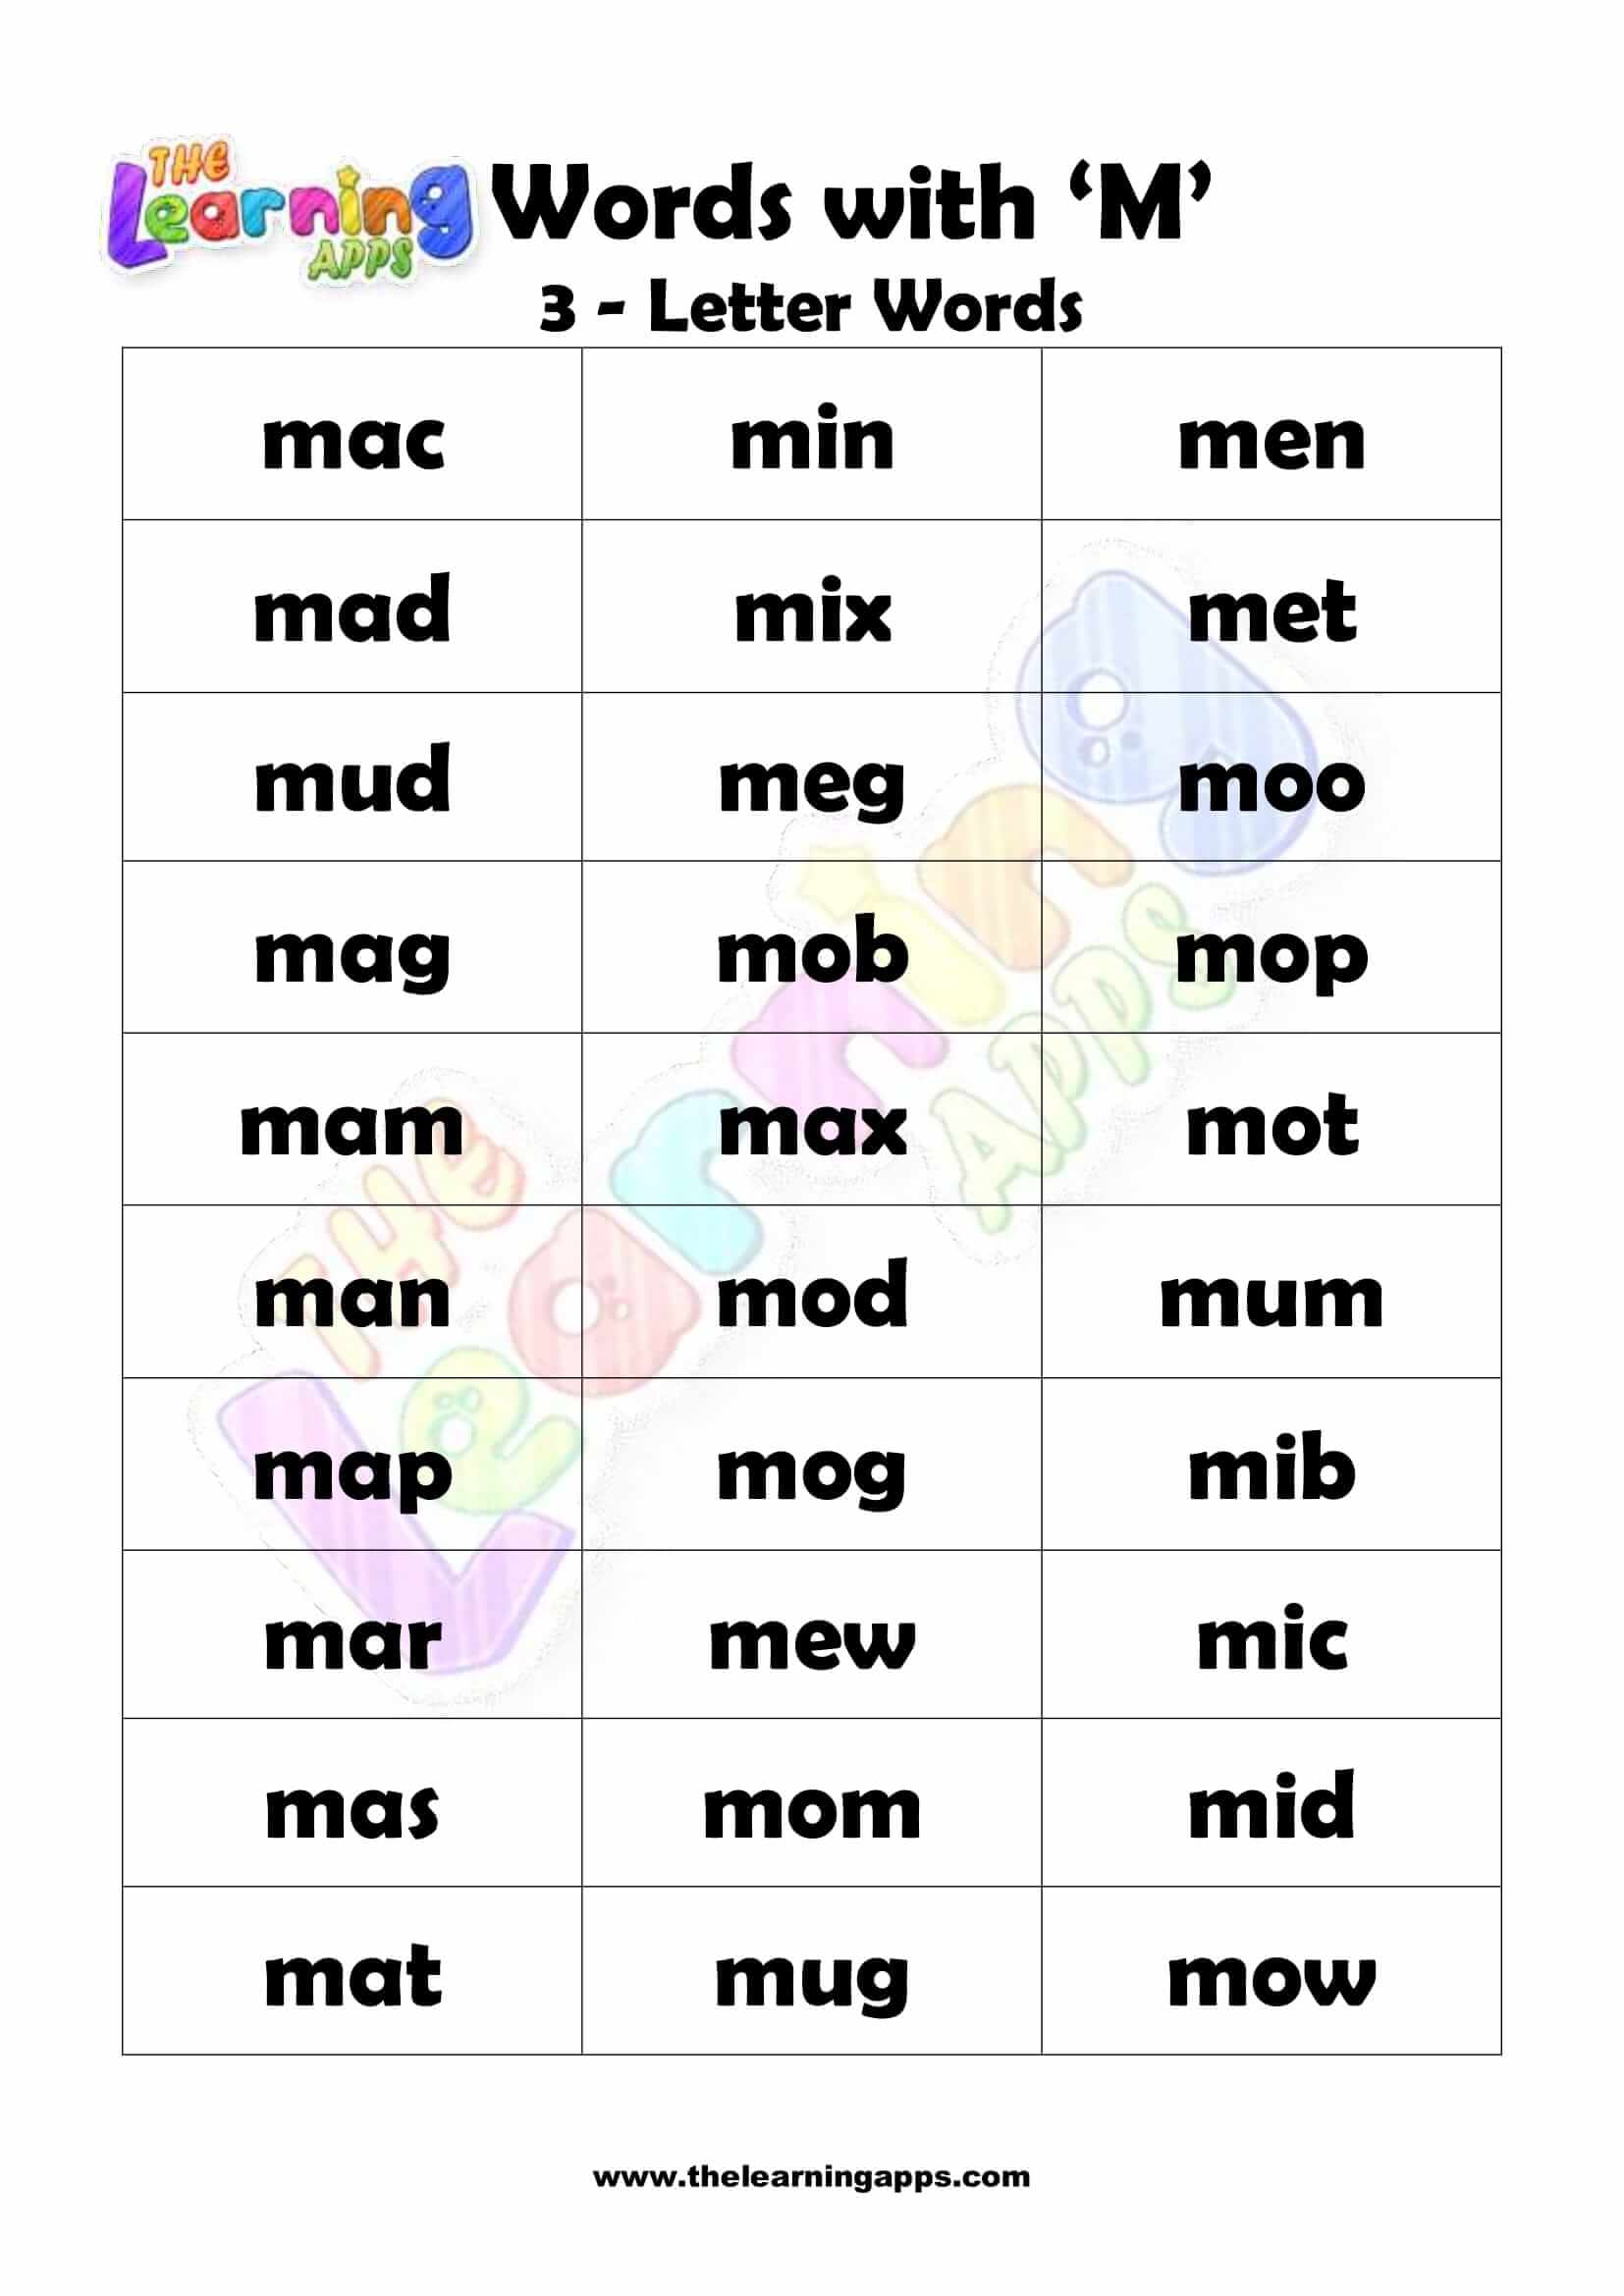 3 LETTER WORD STARTING WITH M